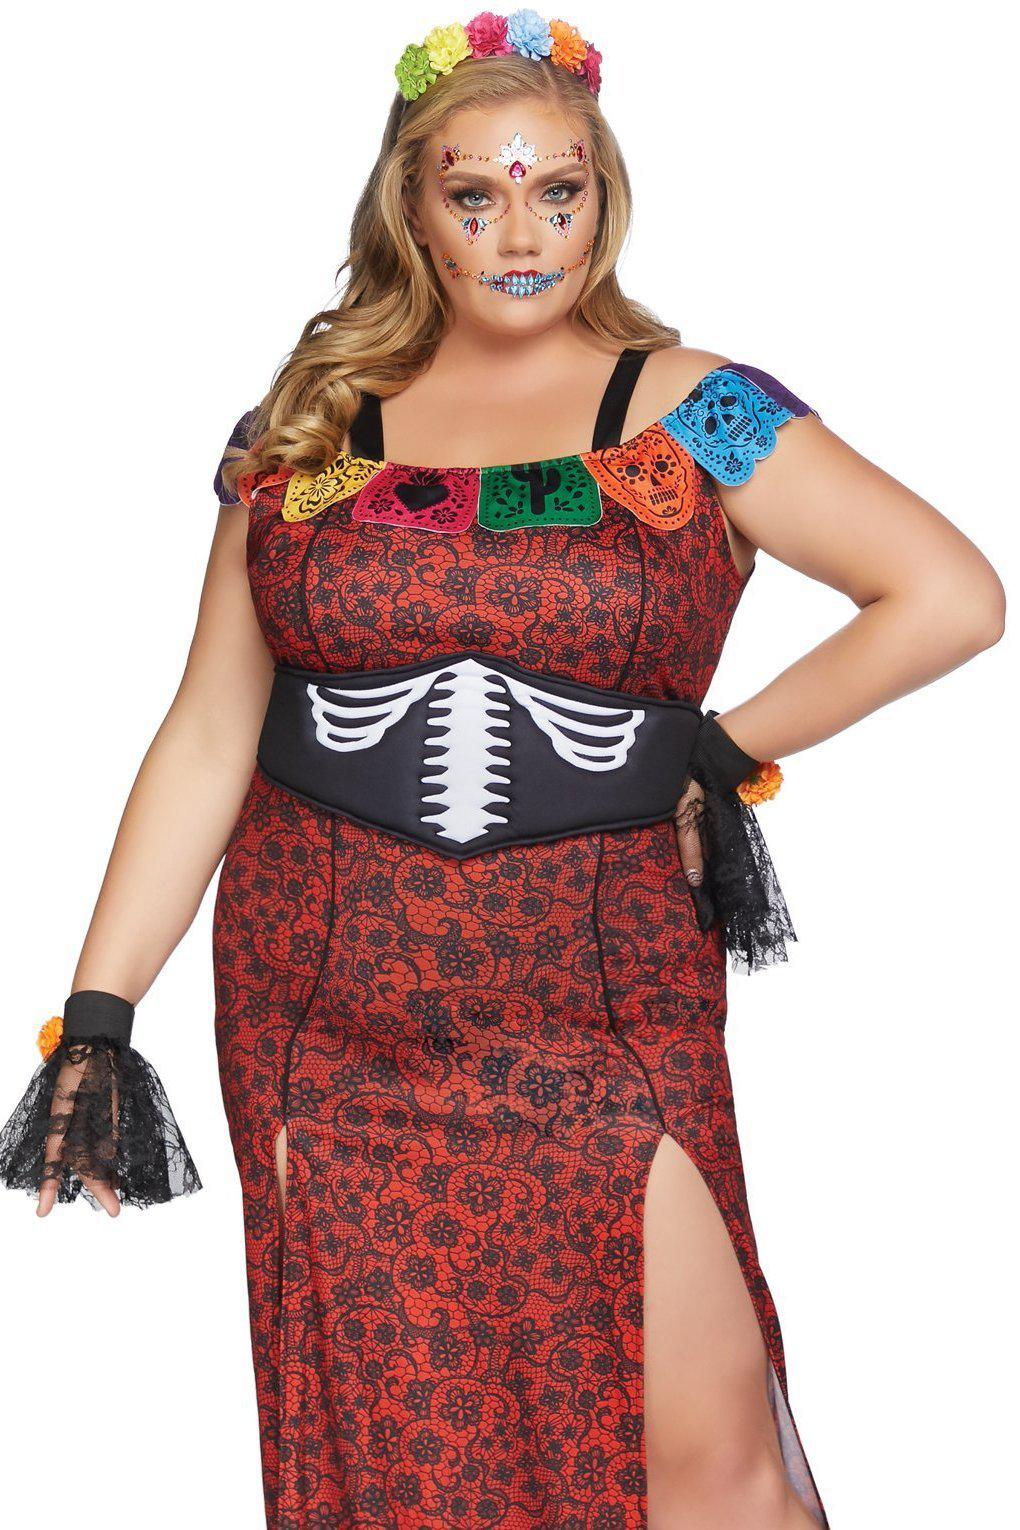 Plus Size Day of the Dead Beauty Costume-Other Costumes-Leg Avenue-Multi-1/2XL-SEXYSHOES.COM